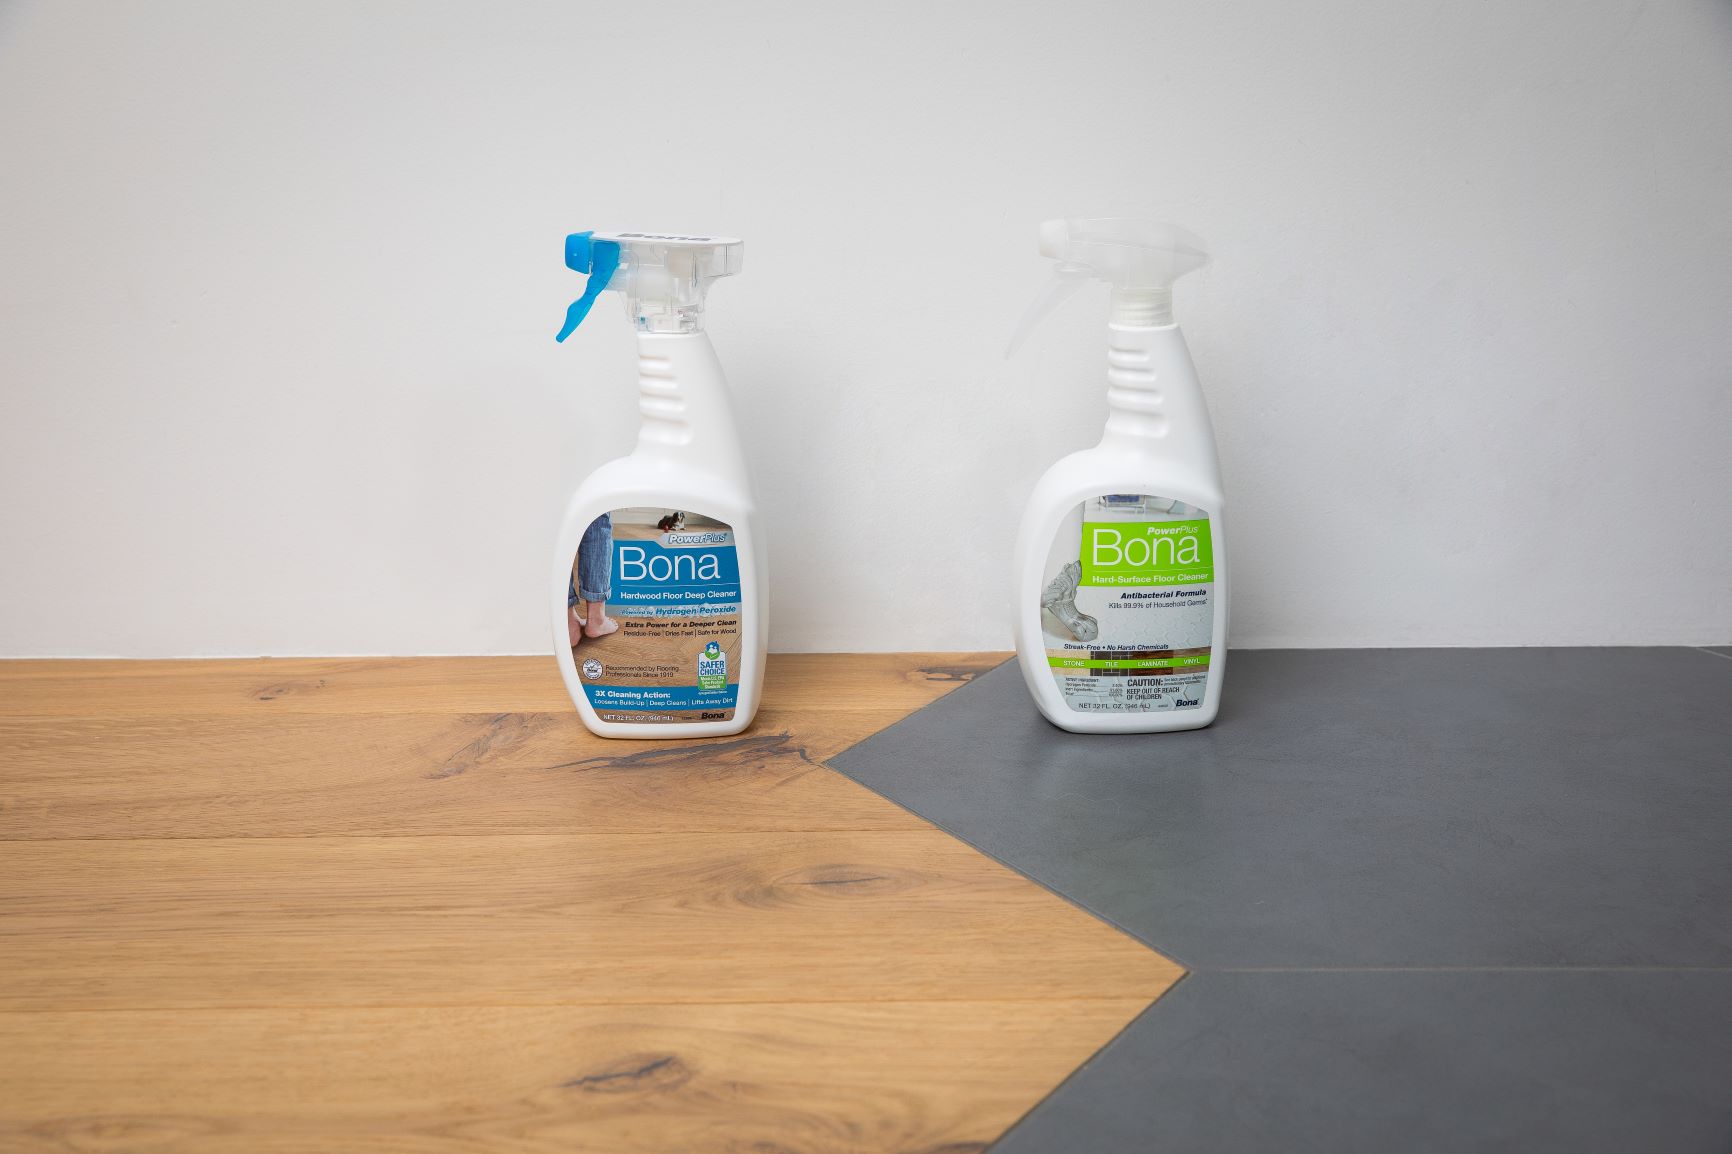 More than 68% of U.S. adults wish they could better streamline their cleaning routine.* Bona PowerPlus Hardwood Floor Cleaner and Bona PowerPlus Antibacterial Hard-Surface Floor Cleaner are the perfect spring cleaning duo makes cleaning floors a breeze. 

*According to a recent Harris Poll Survey (February 2021).